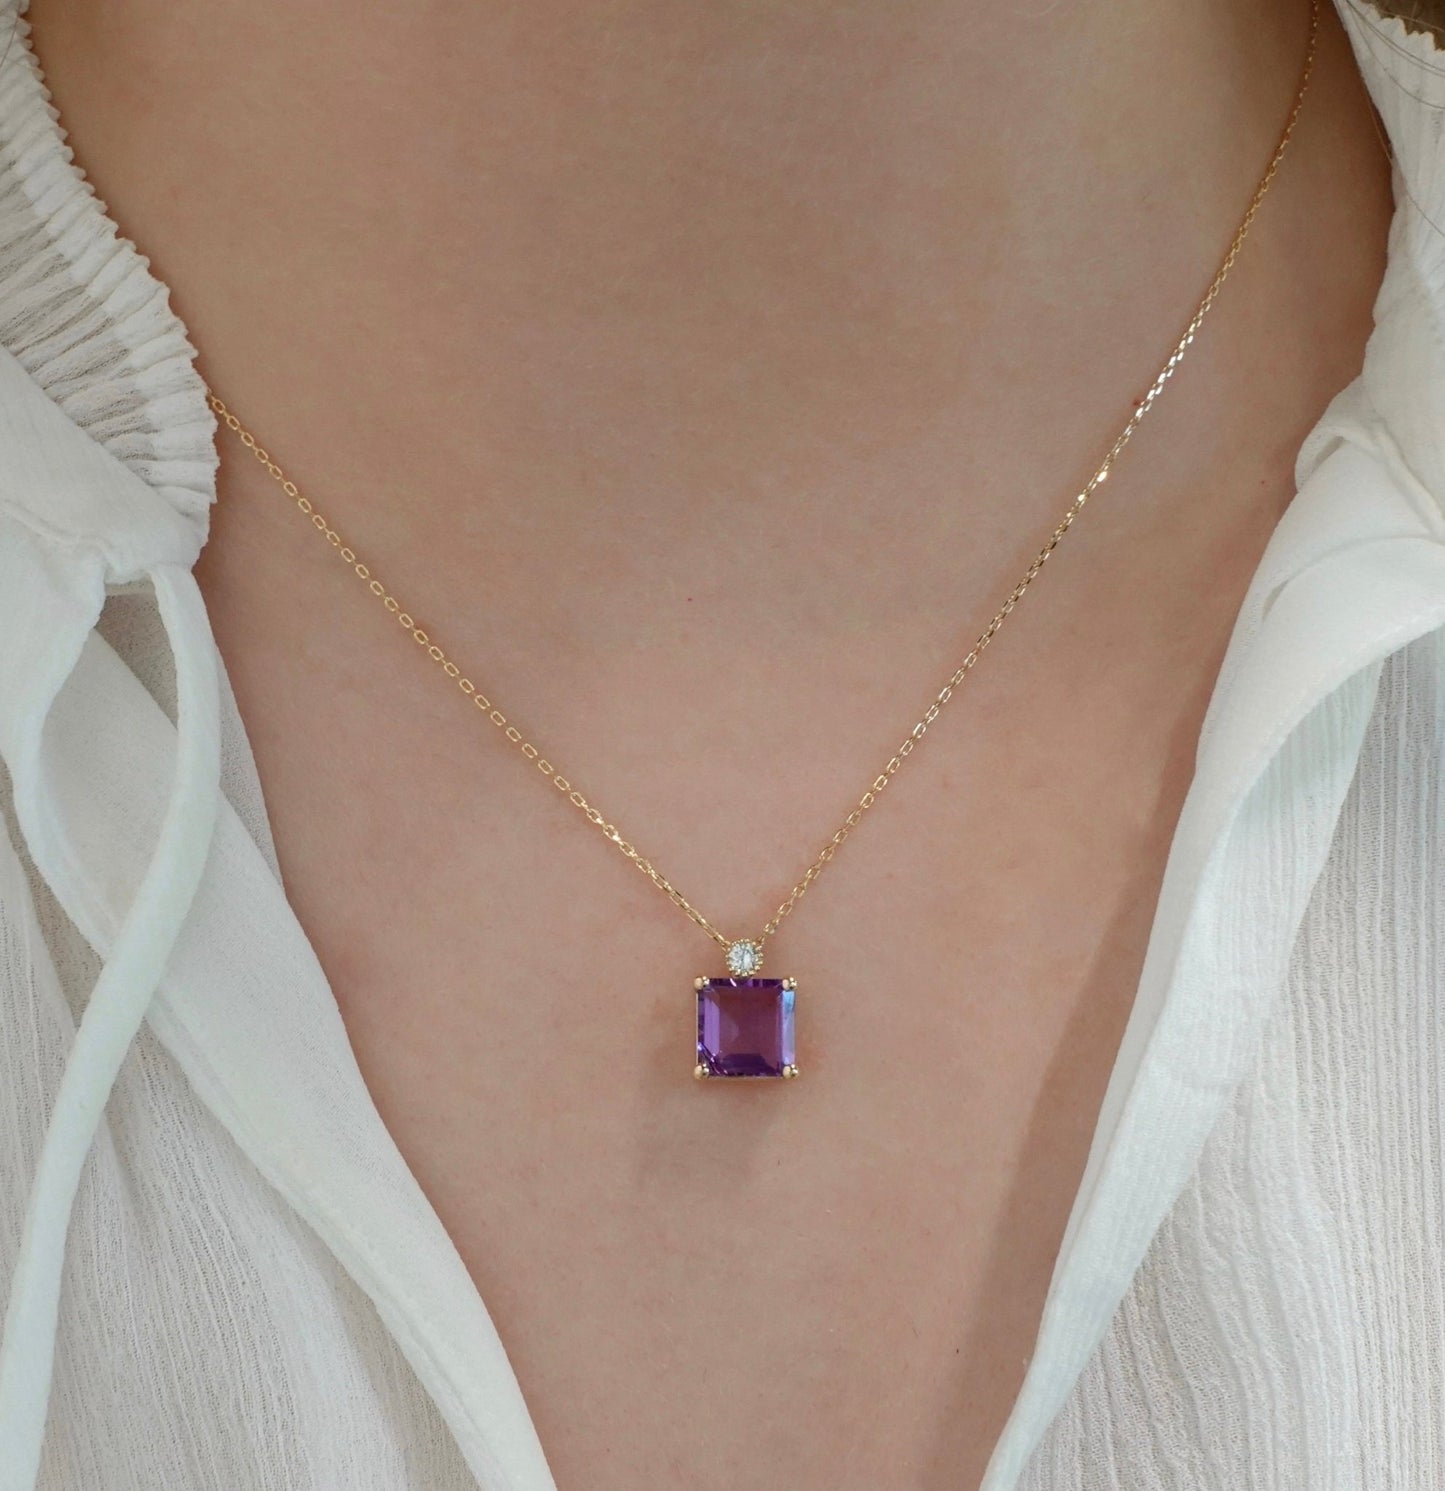 Princesa Necklace in Diamond and Amethyst - 18k Gold - Lynor